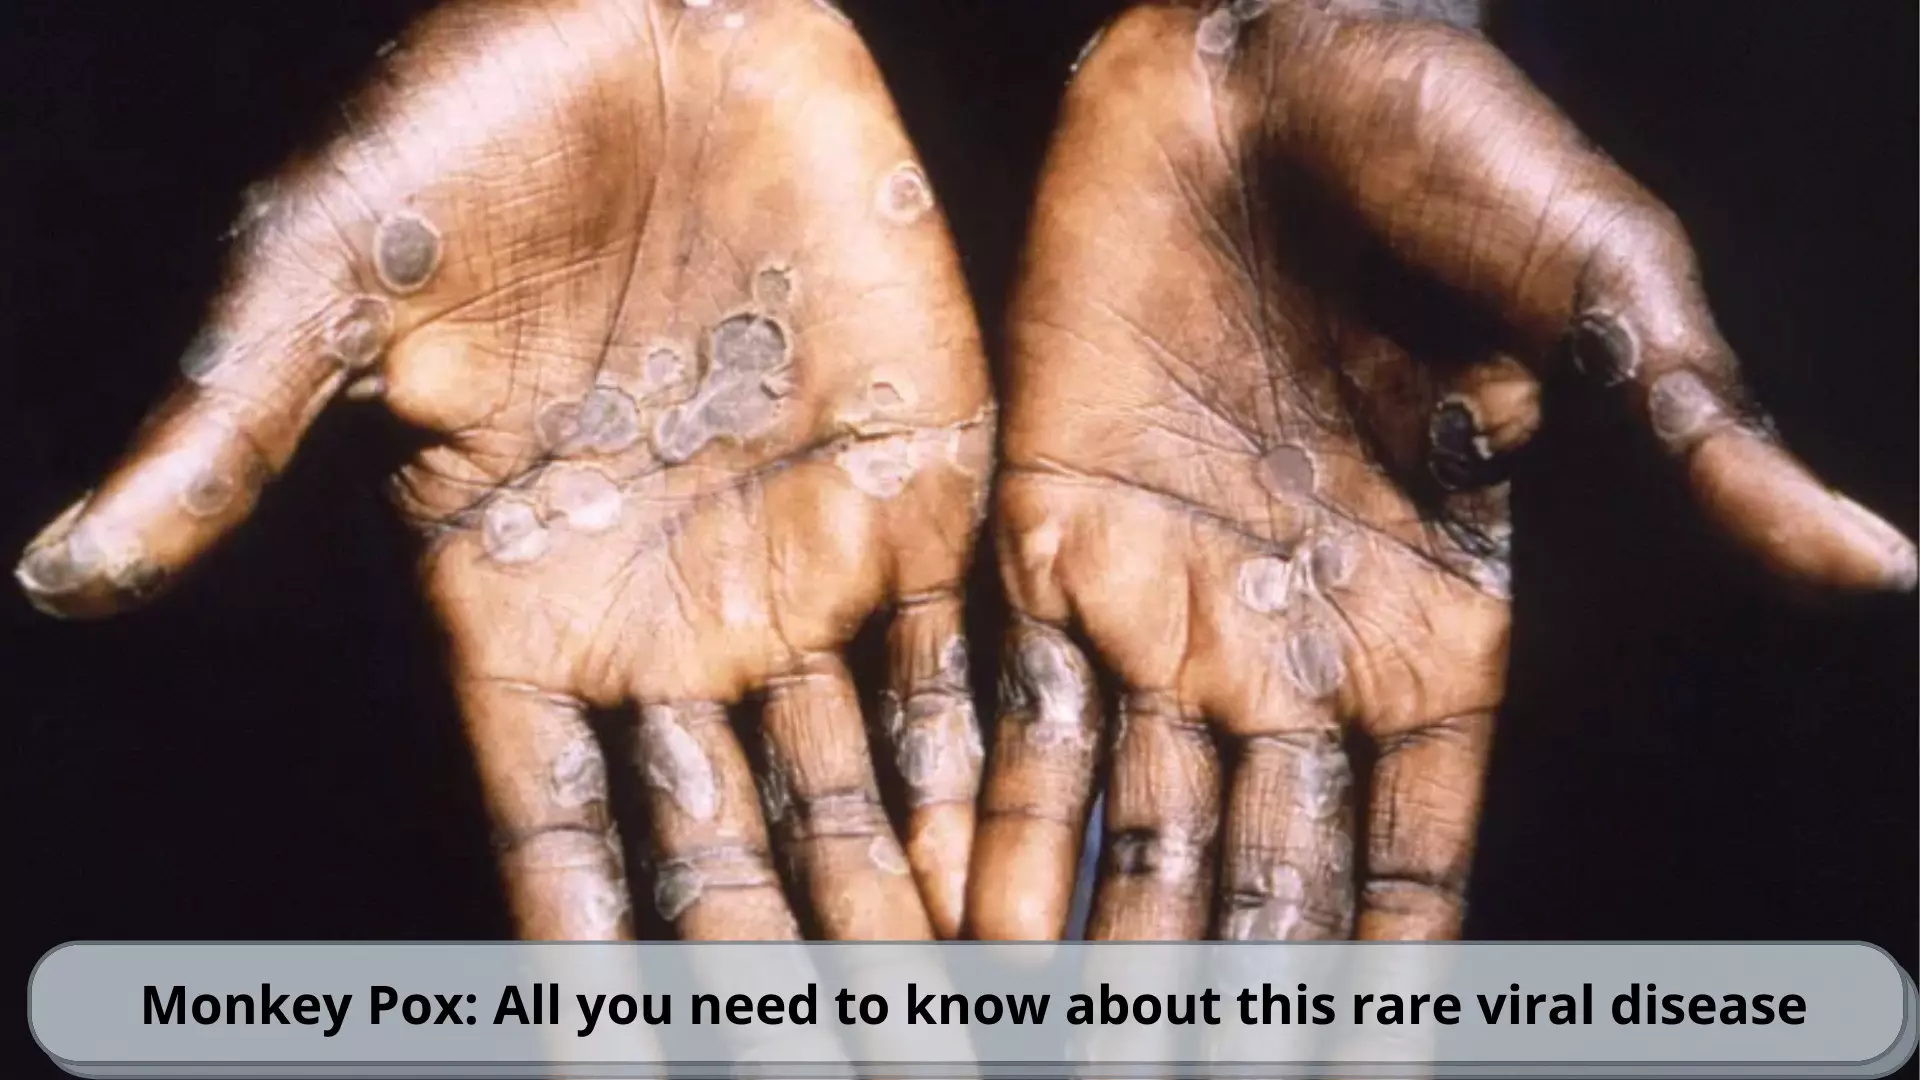 Monkey Pox: All you need to know about this rare viral disease